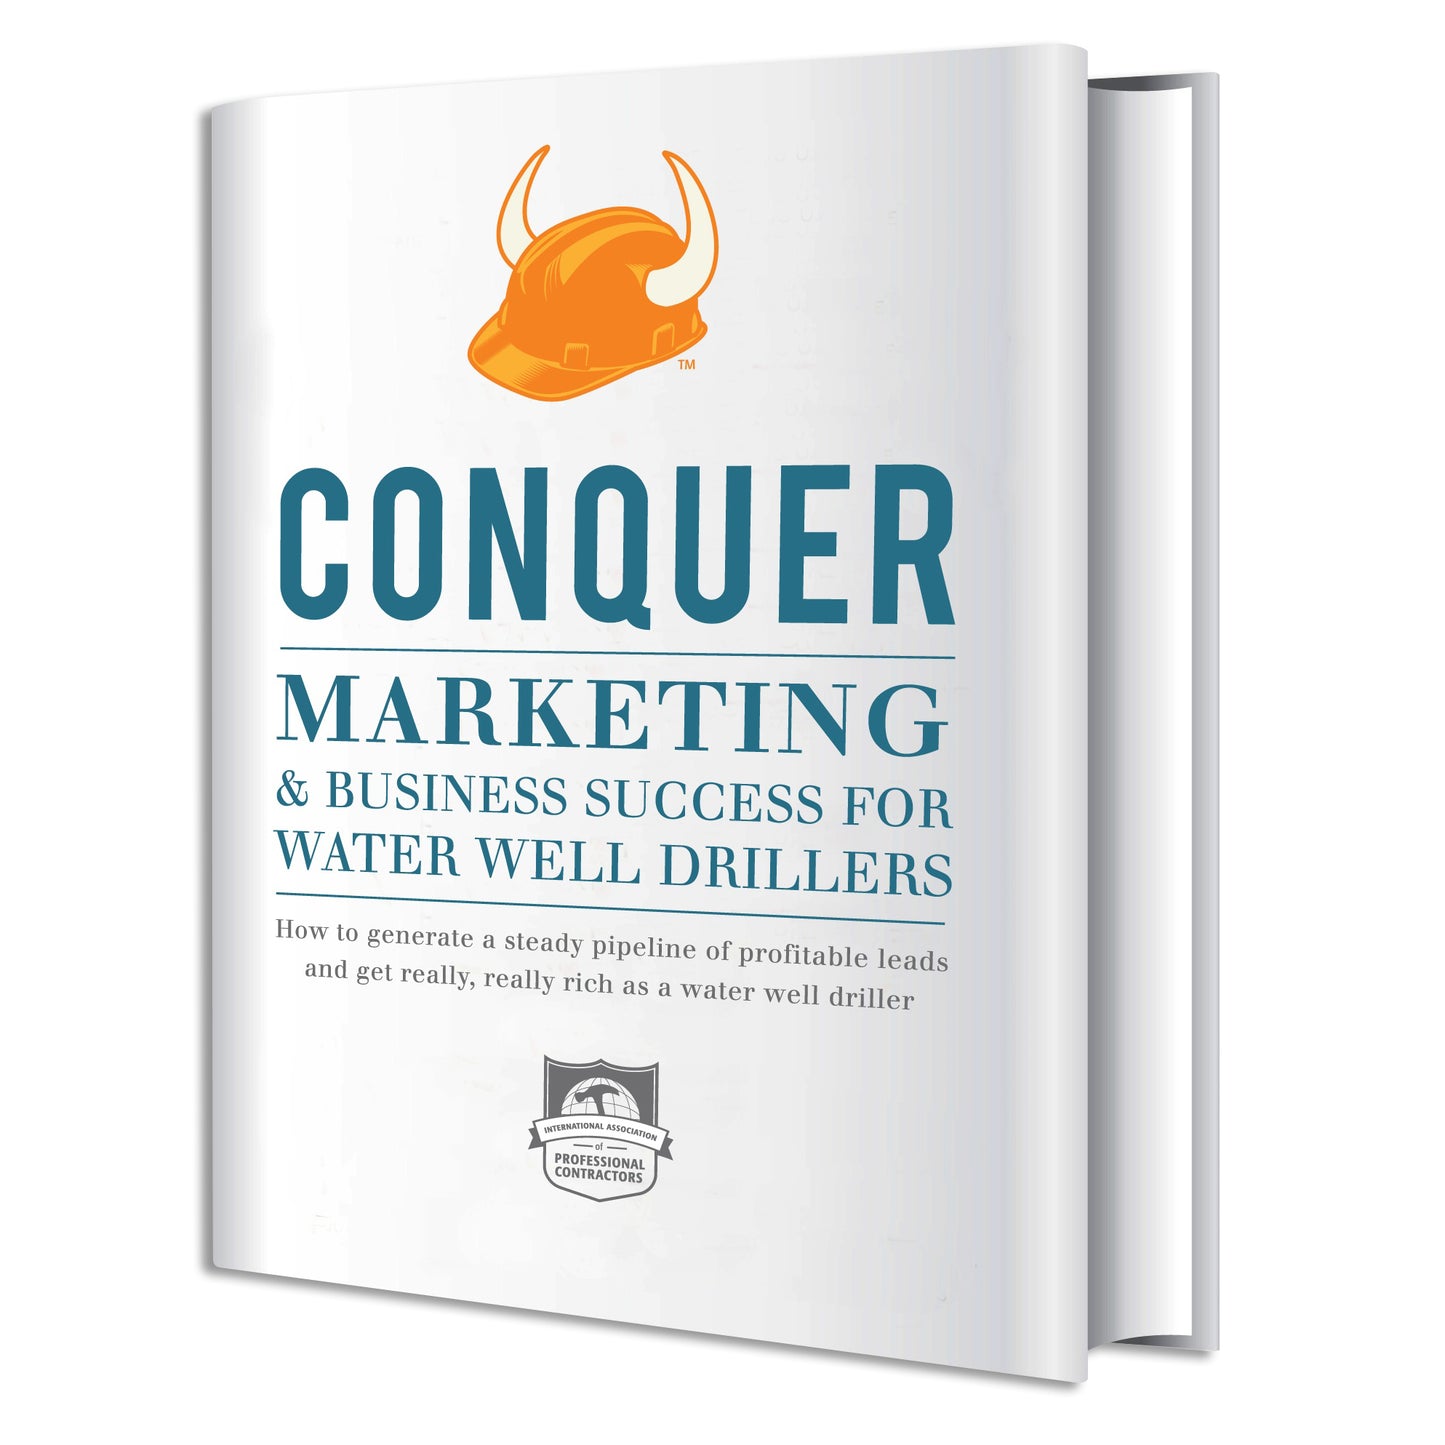 CONQUER Marketing and Business Success for Water Well Drillers PDF